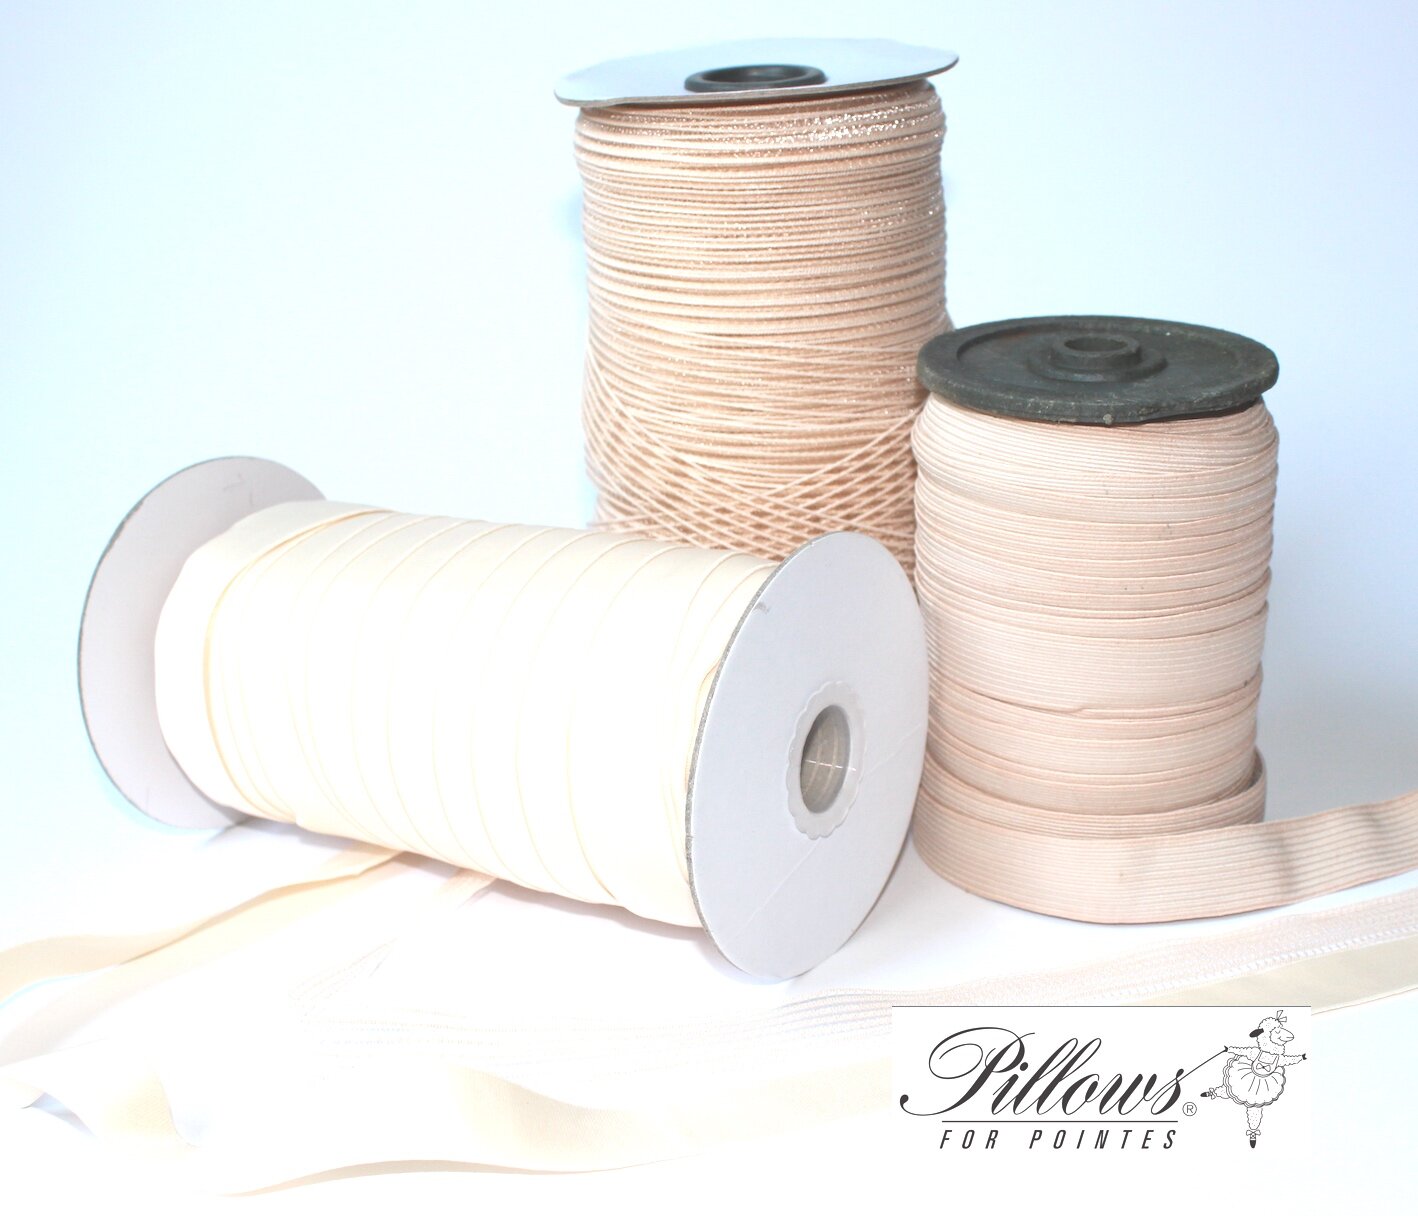 Pillows for Pointes Ballet Shoes Stitching Kit